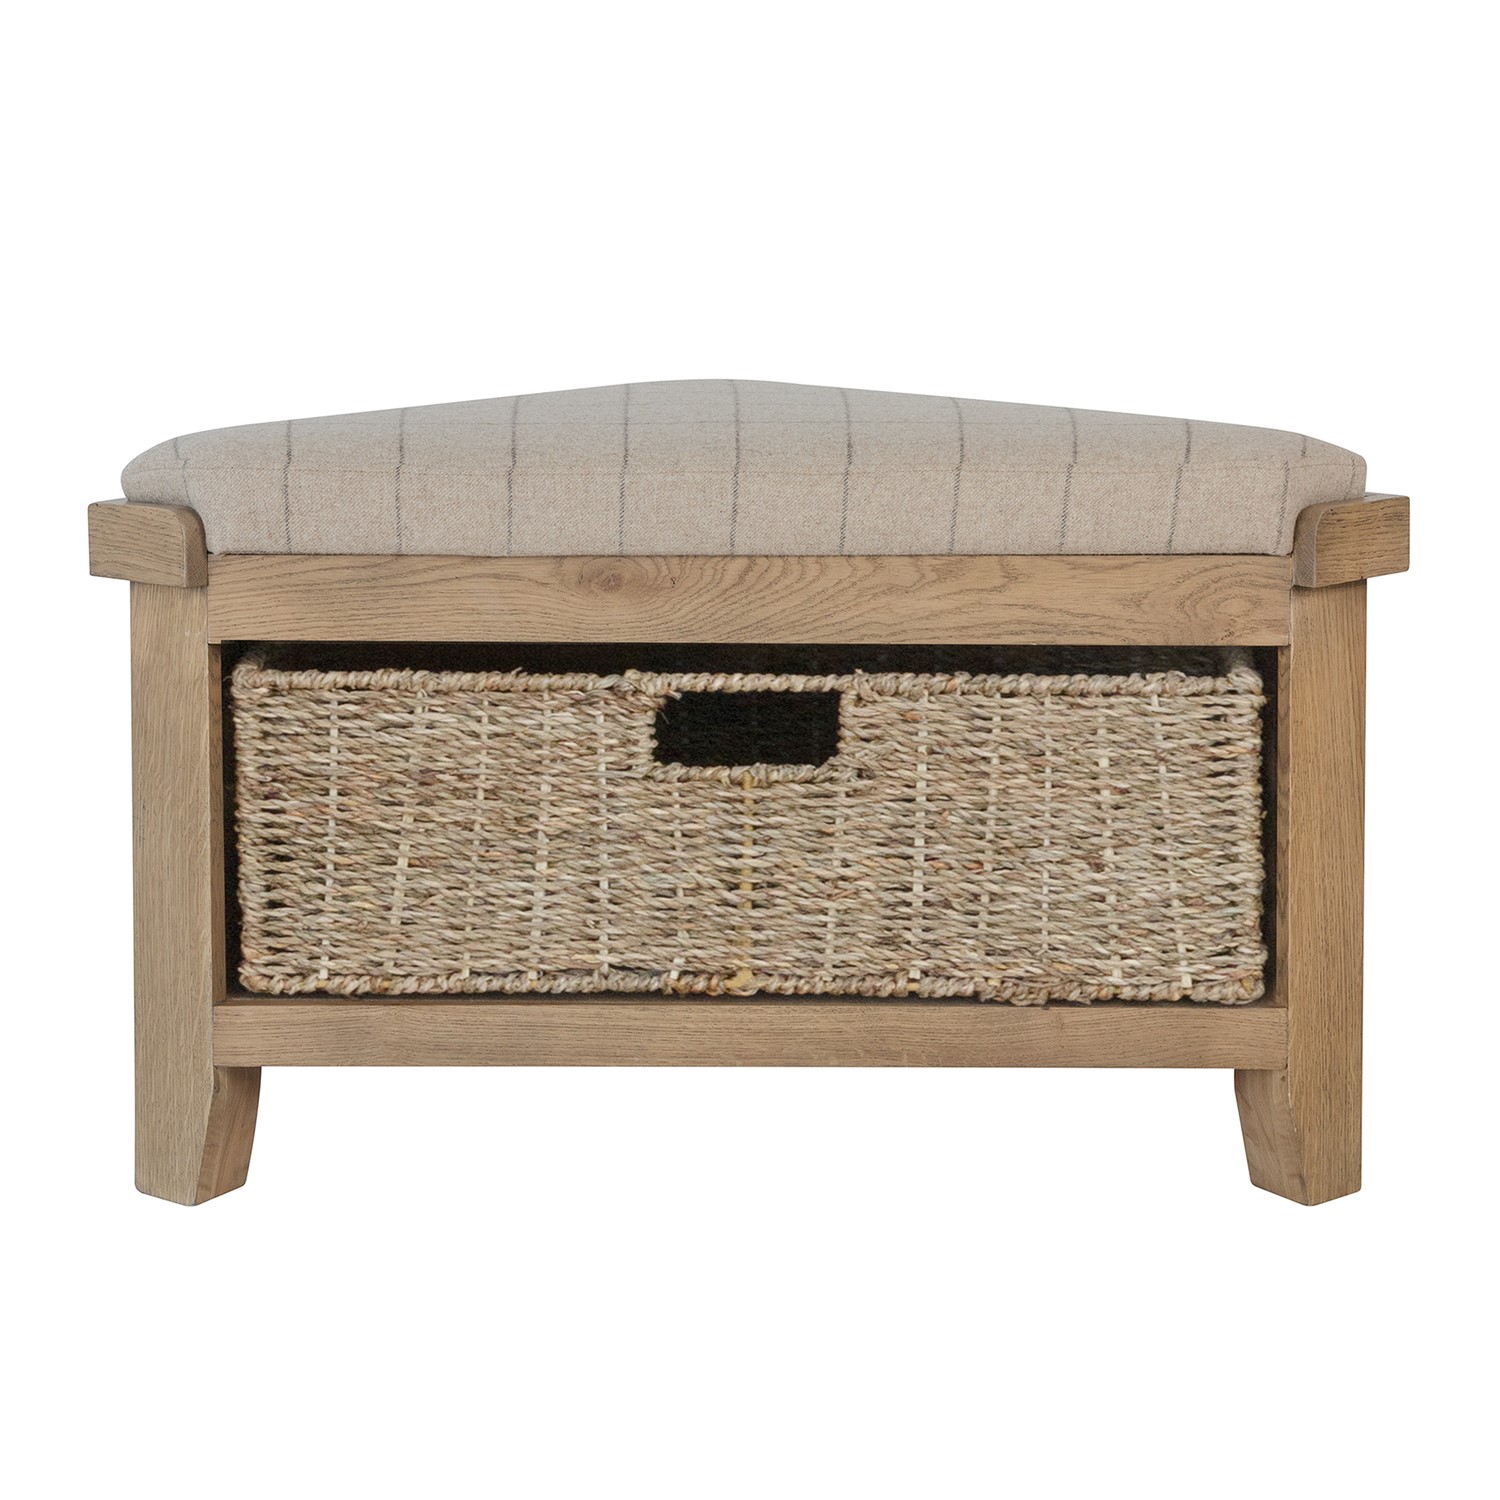 Read more about Cream corner hall bench with wicker basket